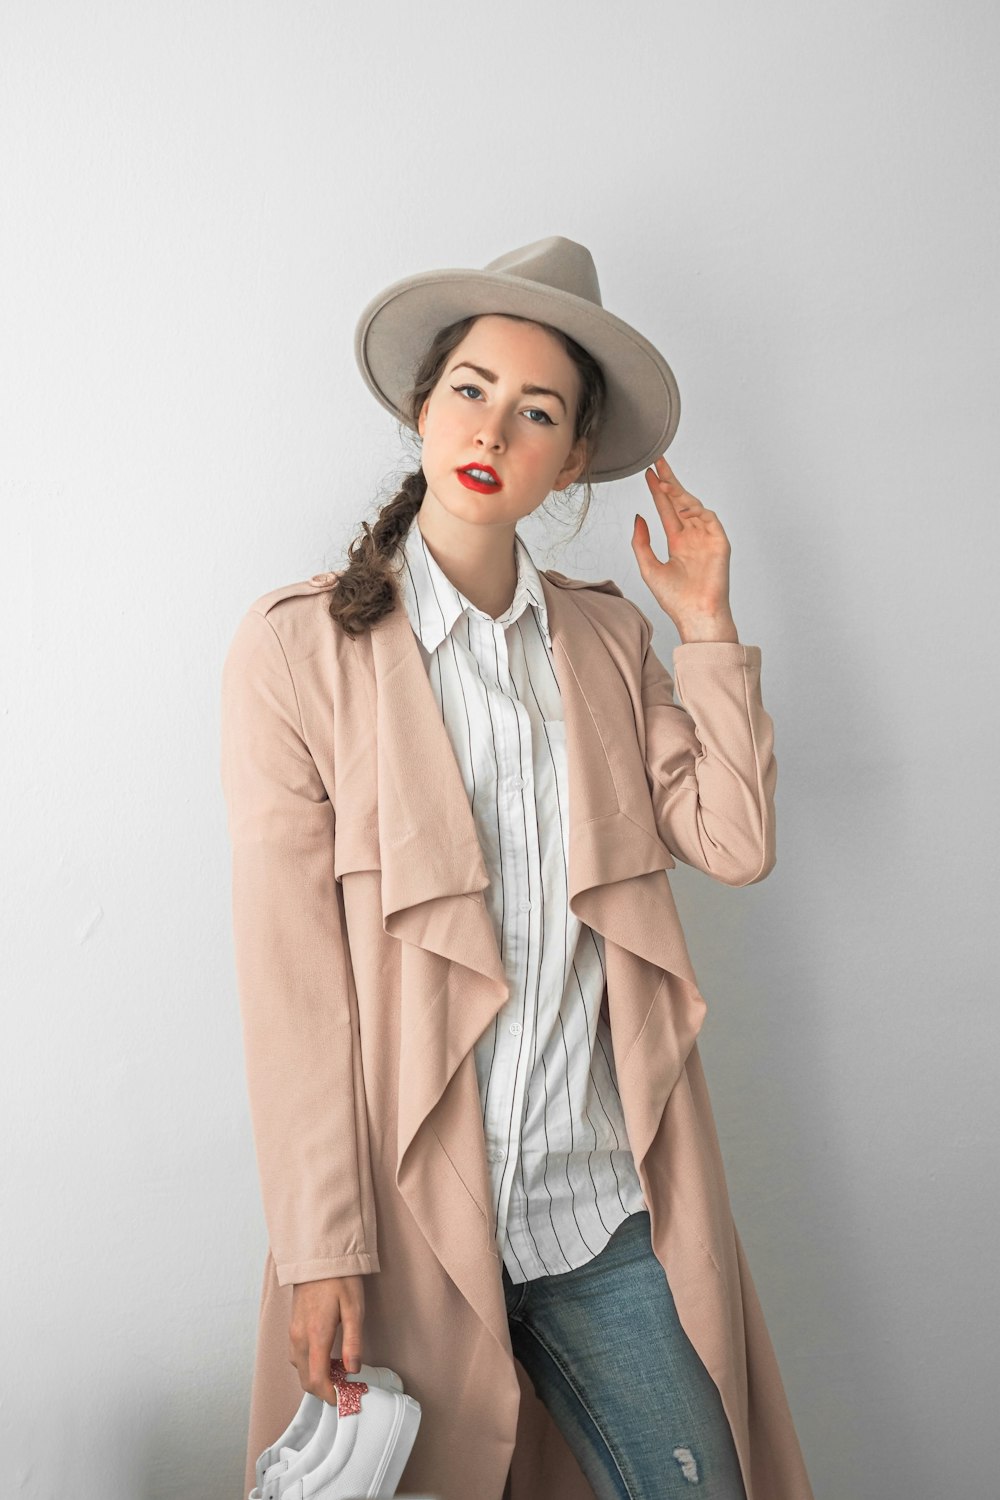 a woman in a hat and coat posing for a picture